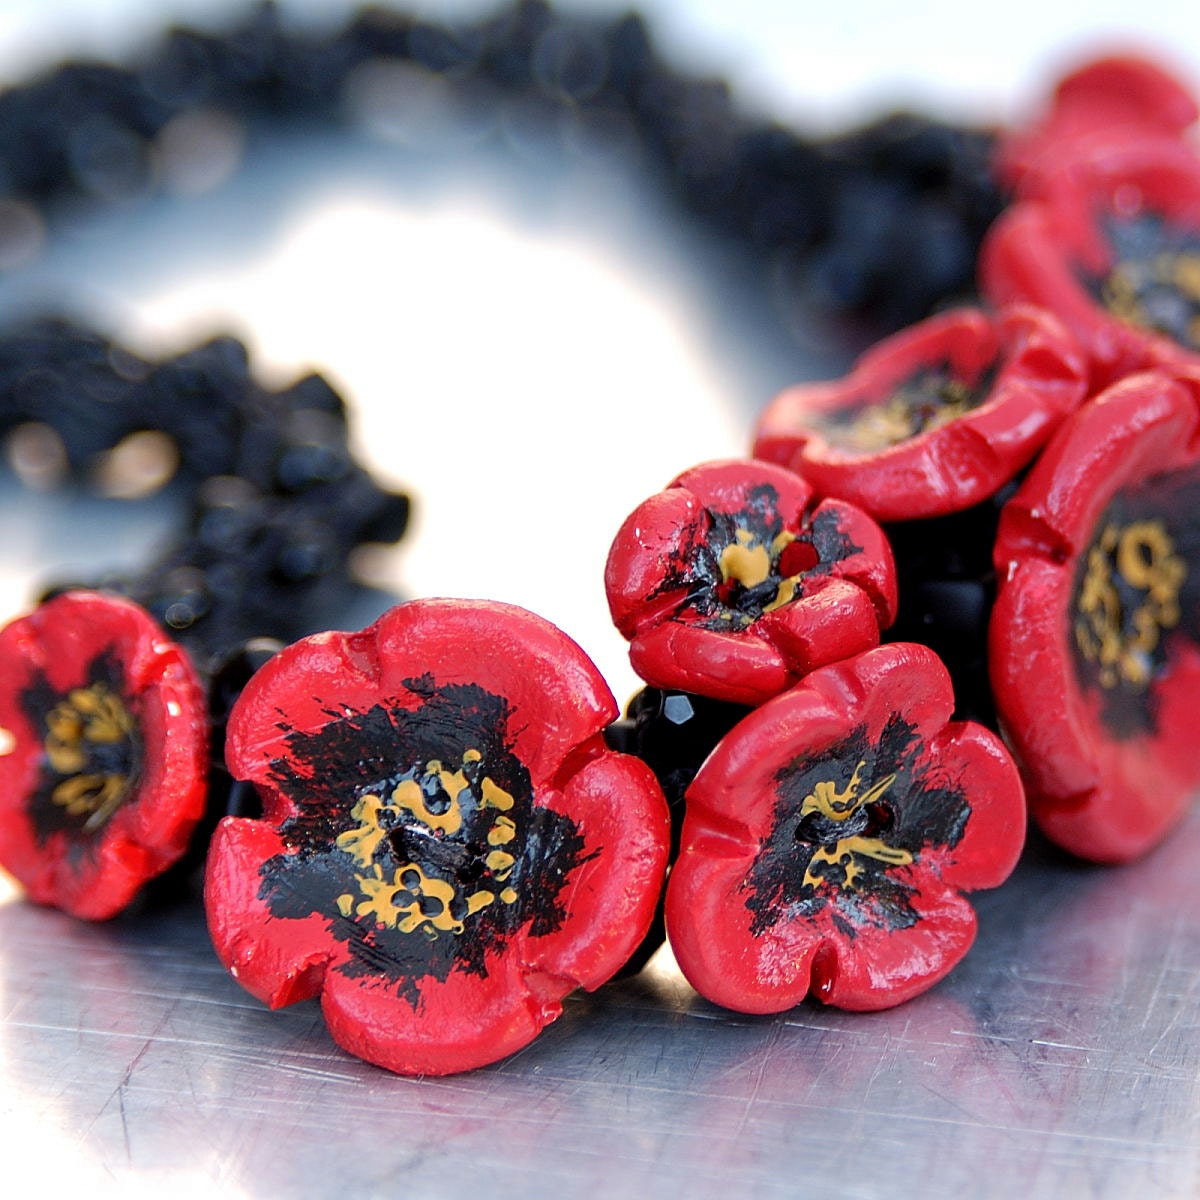 Clay Poppies Yarn Necklace - Hand-knitted from Black Nylon Yarn with Black Glass Beads and a Bouquet of Clay Poppies